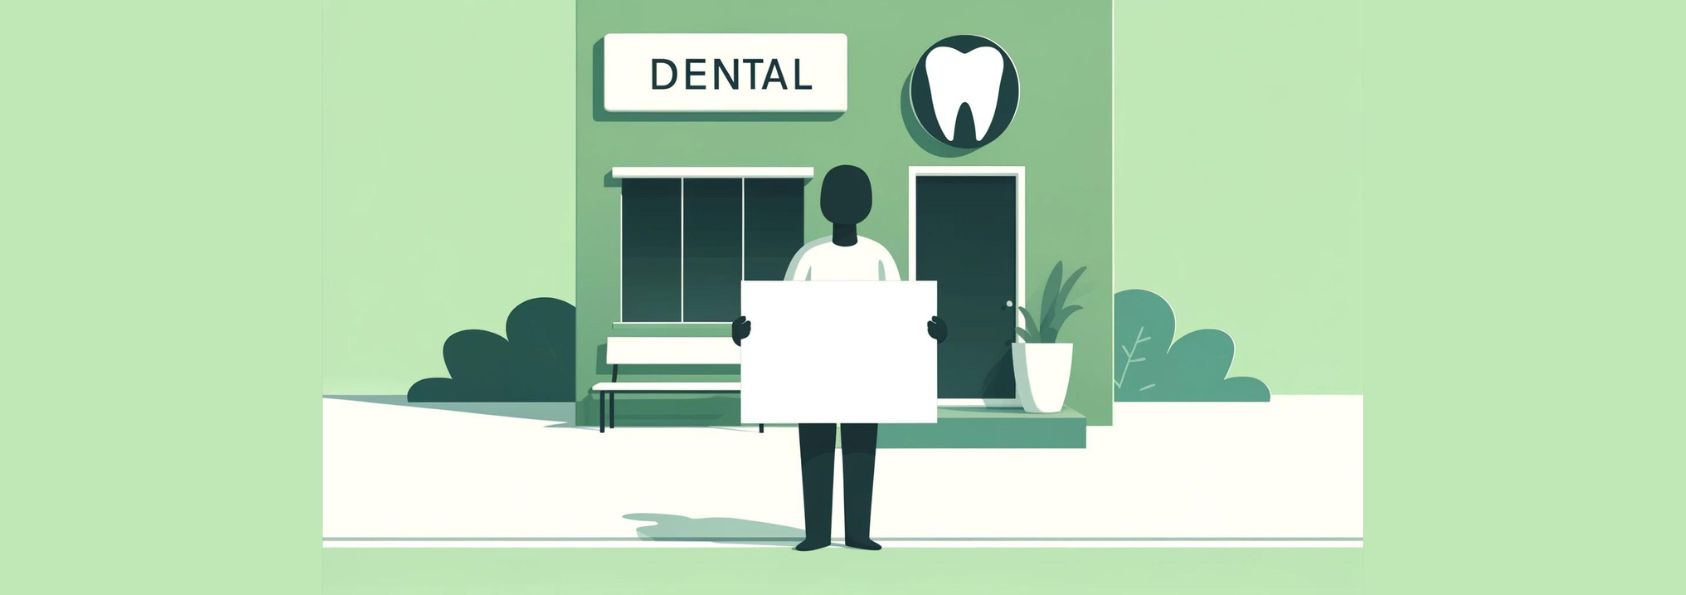 How To Market A Dental Practice